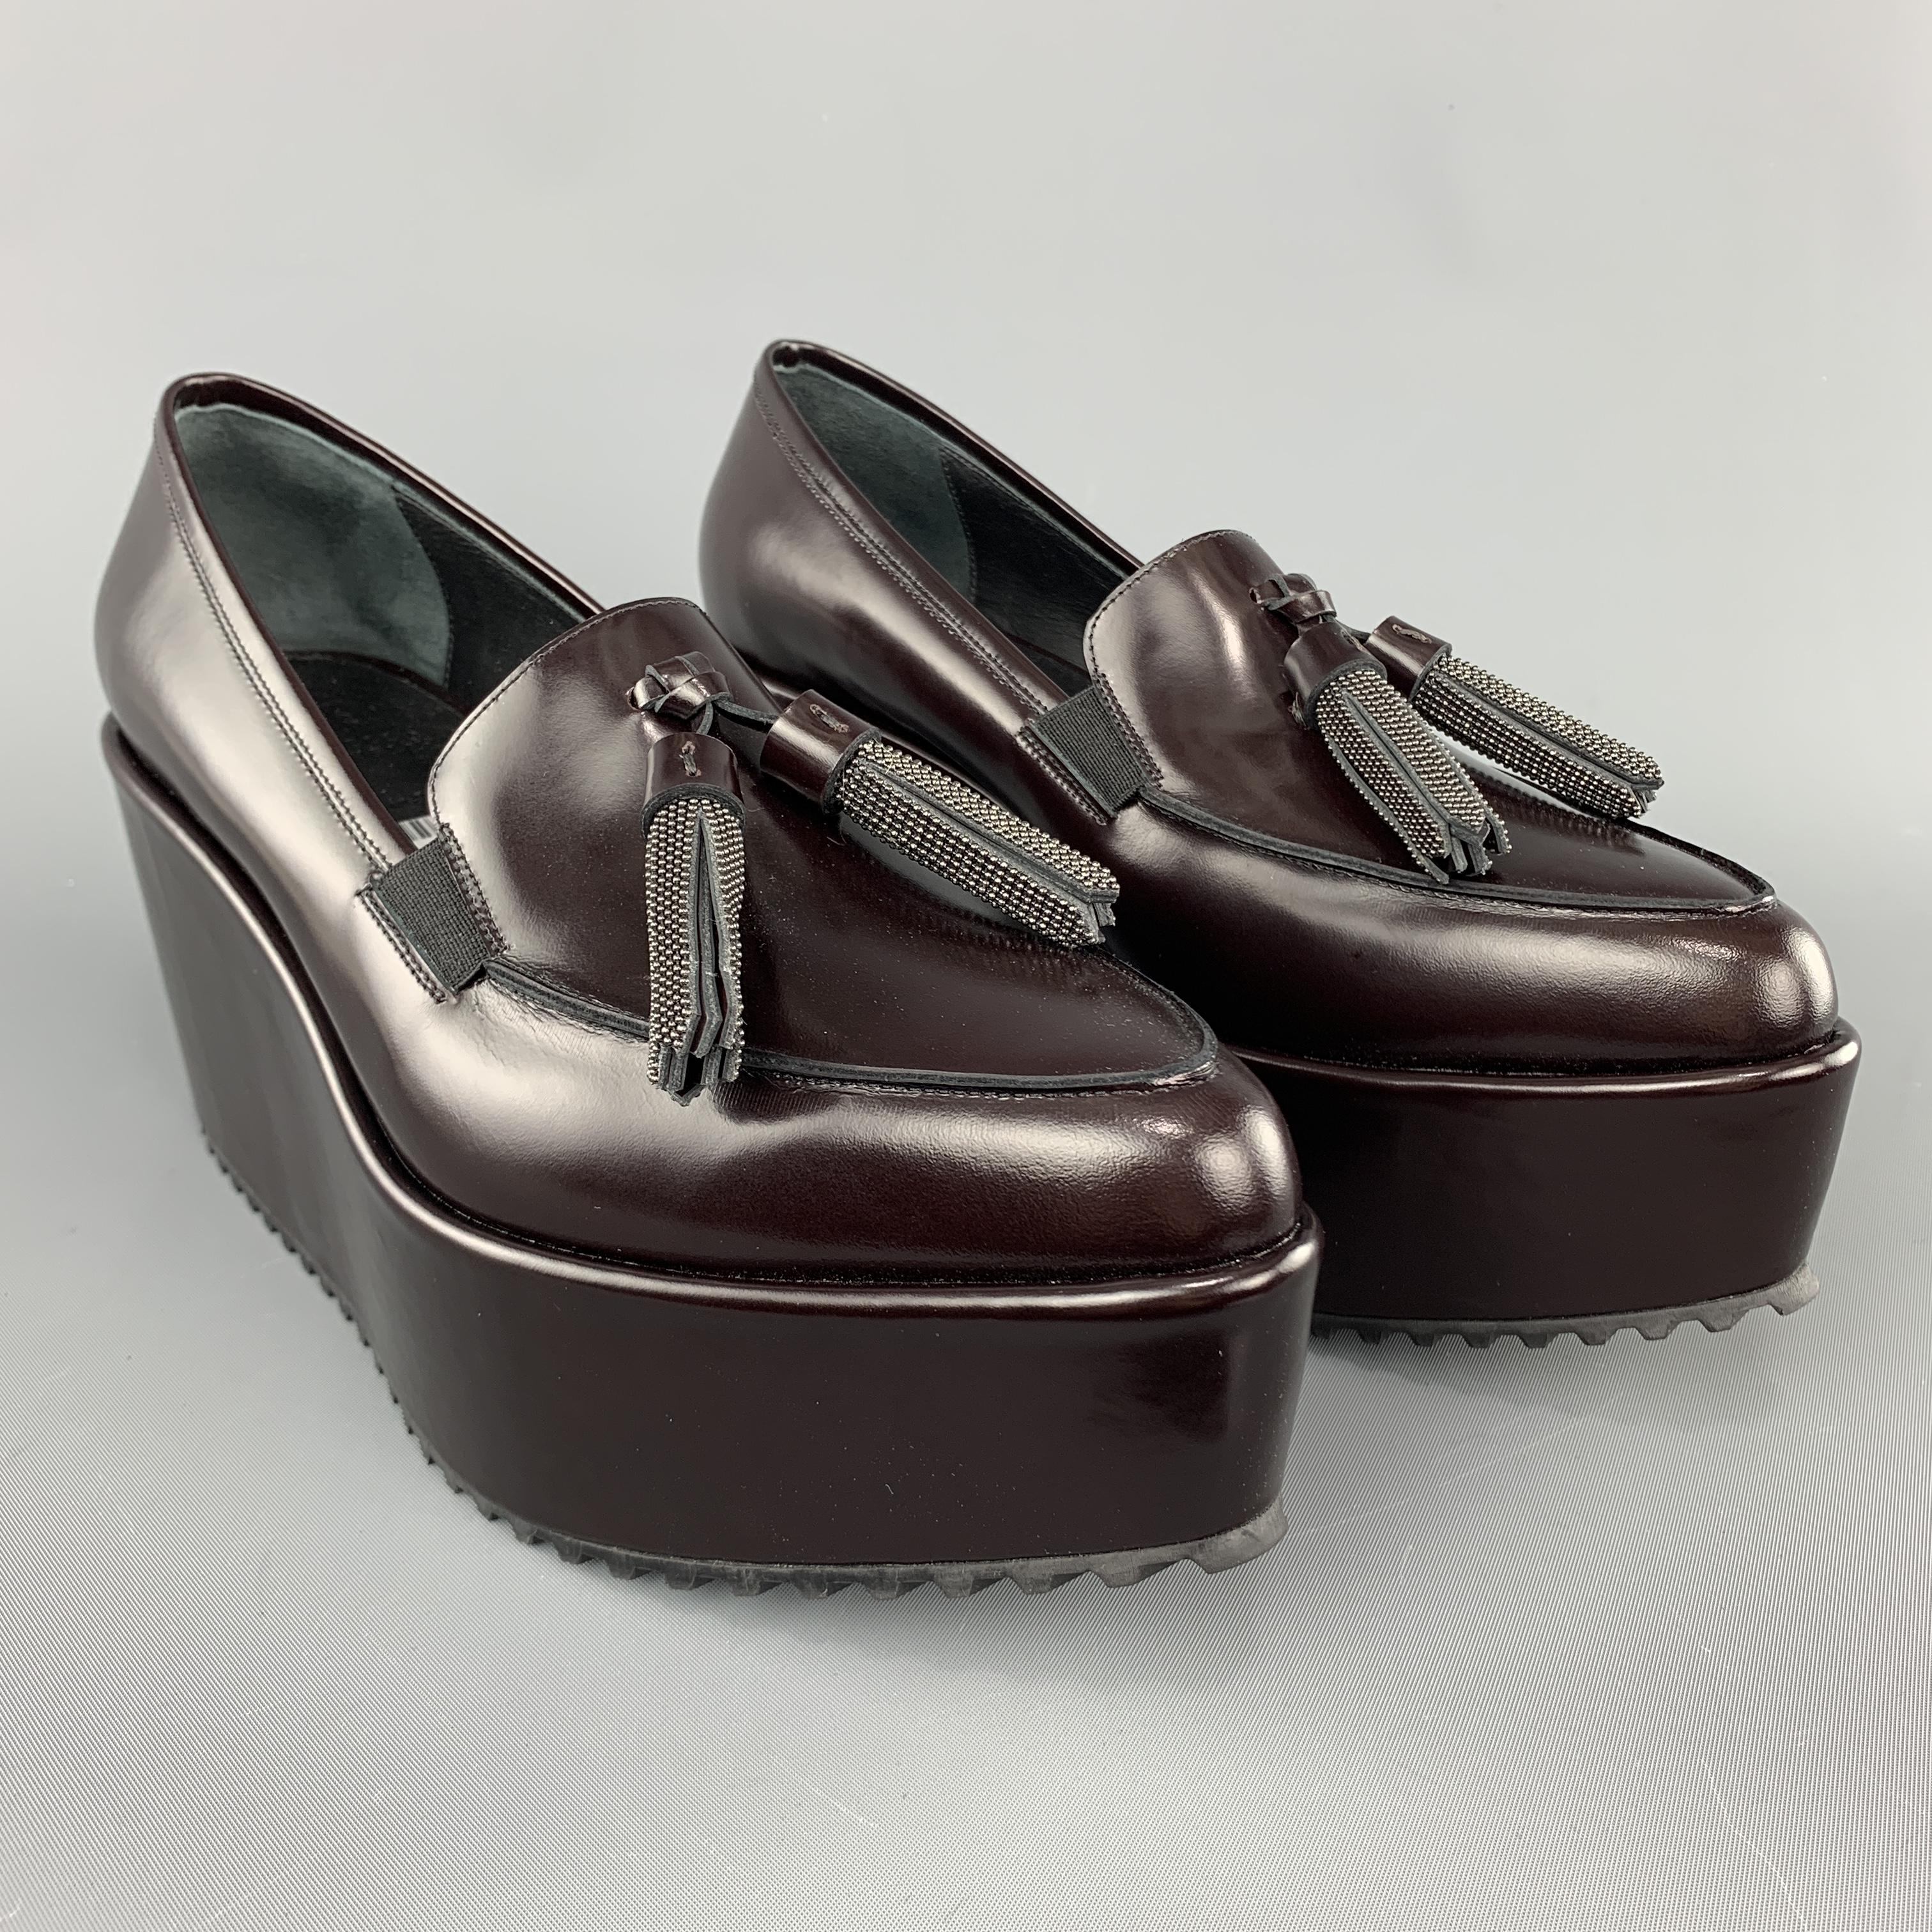 BRUNELLO CUCINELLI loafers come in dark burgundy smooth leather with a pointed apron toe, beaded tassels, and platform sole. Made in Italy.

New with Tags.
Marked: IT 38

Measurements:

Heel: 3 in.
Platform: 2 in.